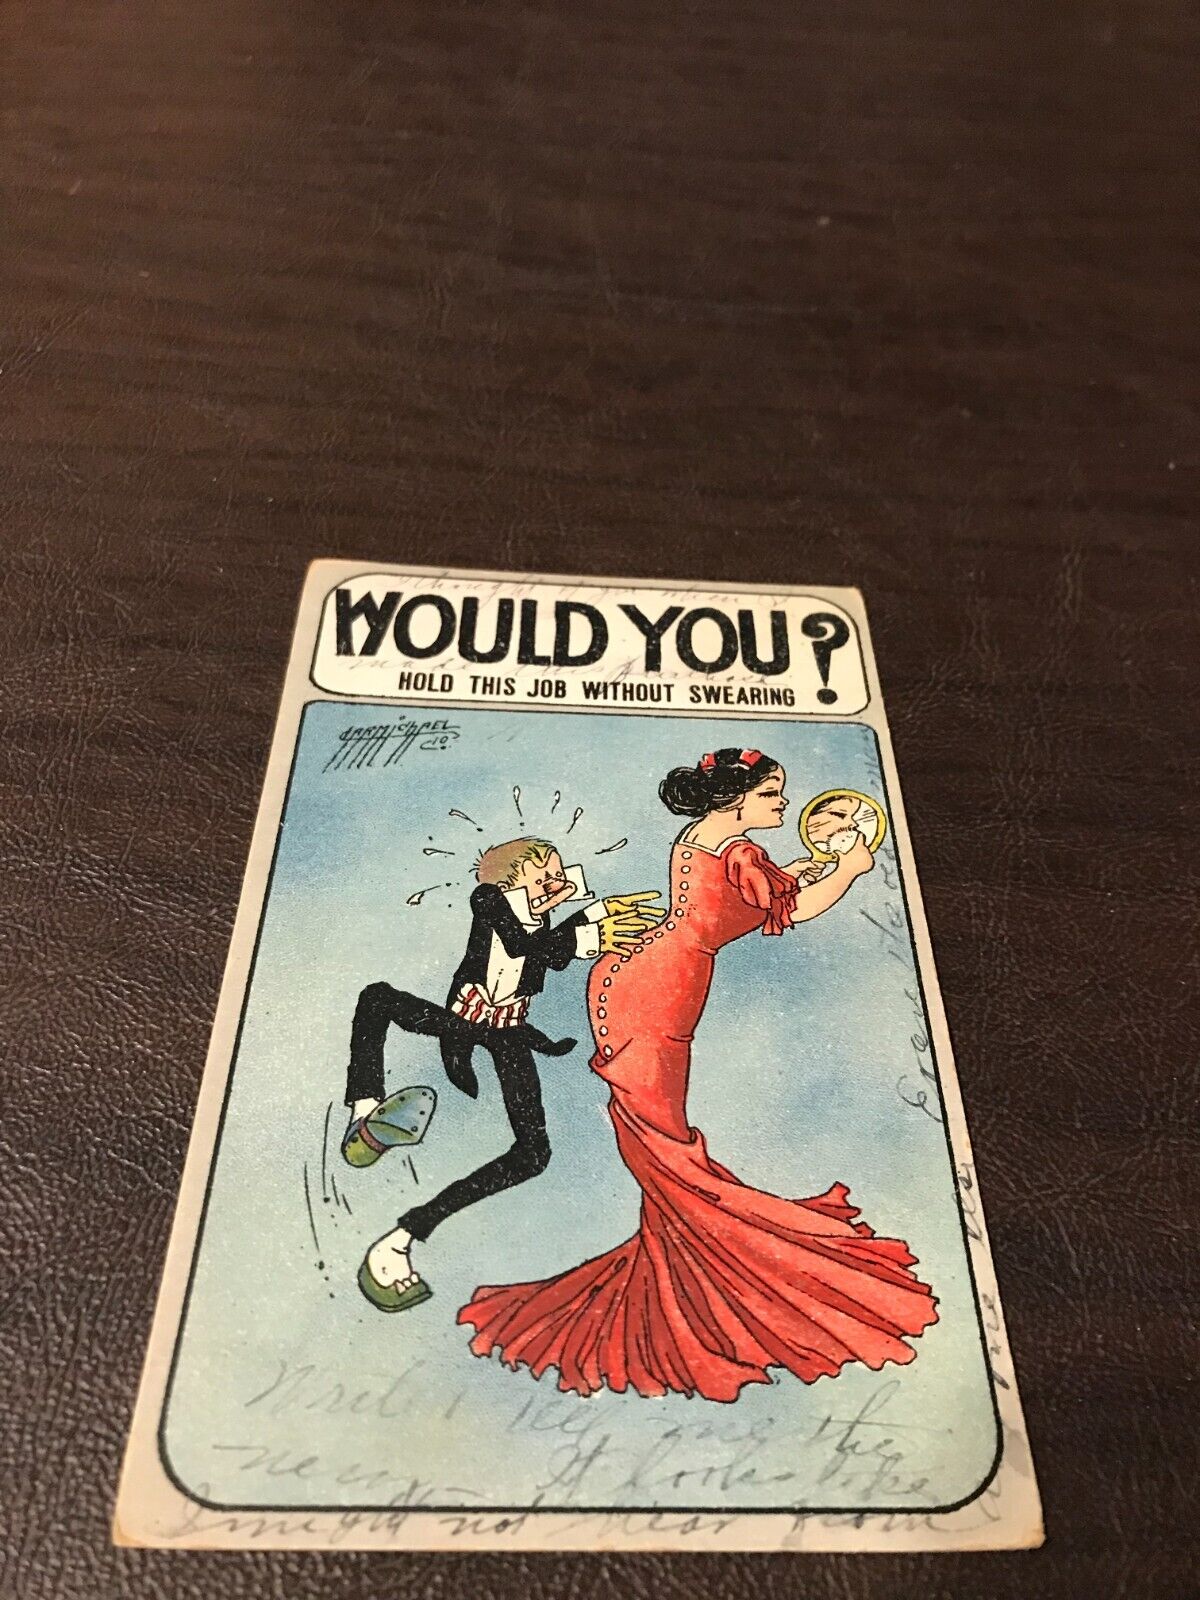 EARLY HUMOR 1910 - POSTED POSTCARD - WOULD YOU? HOLD THIS JOB WITHOUT SWEARING